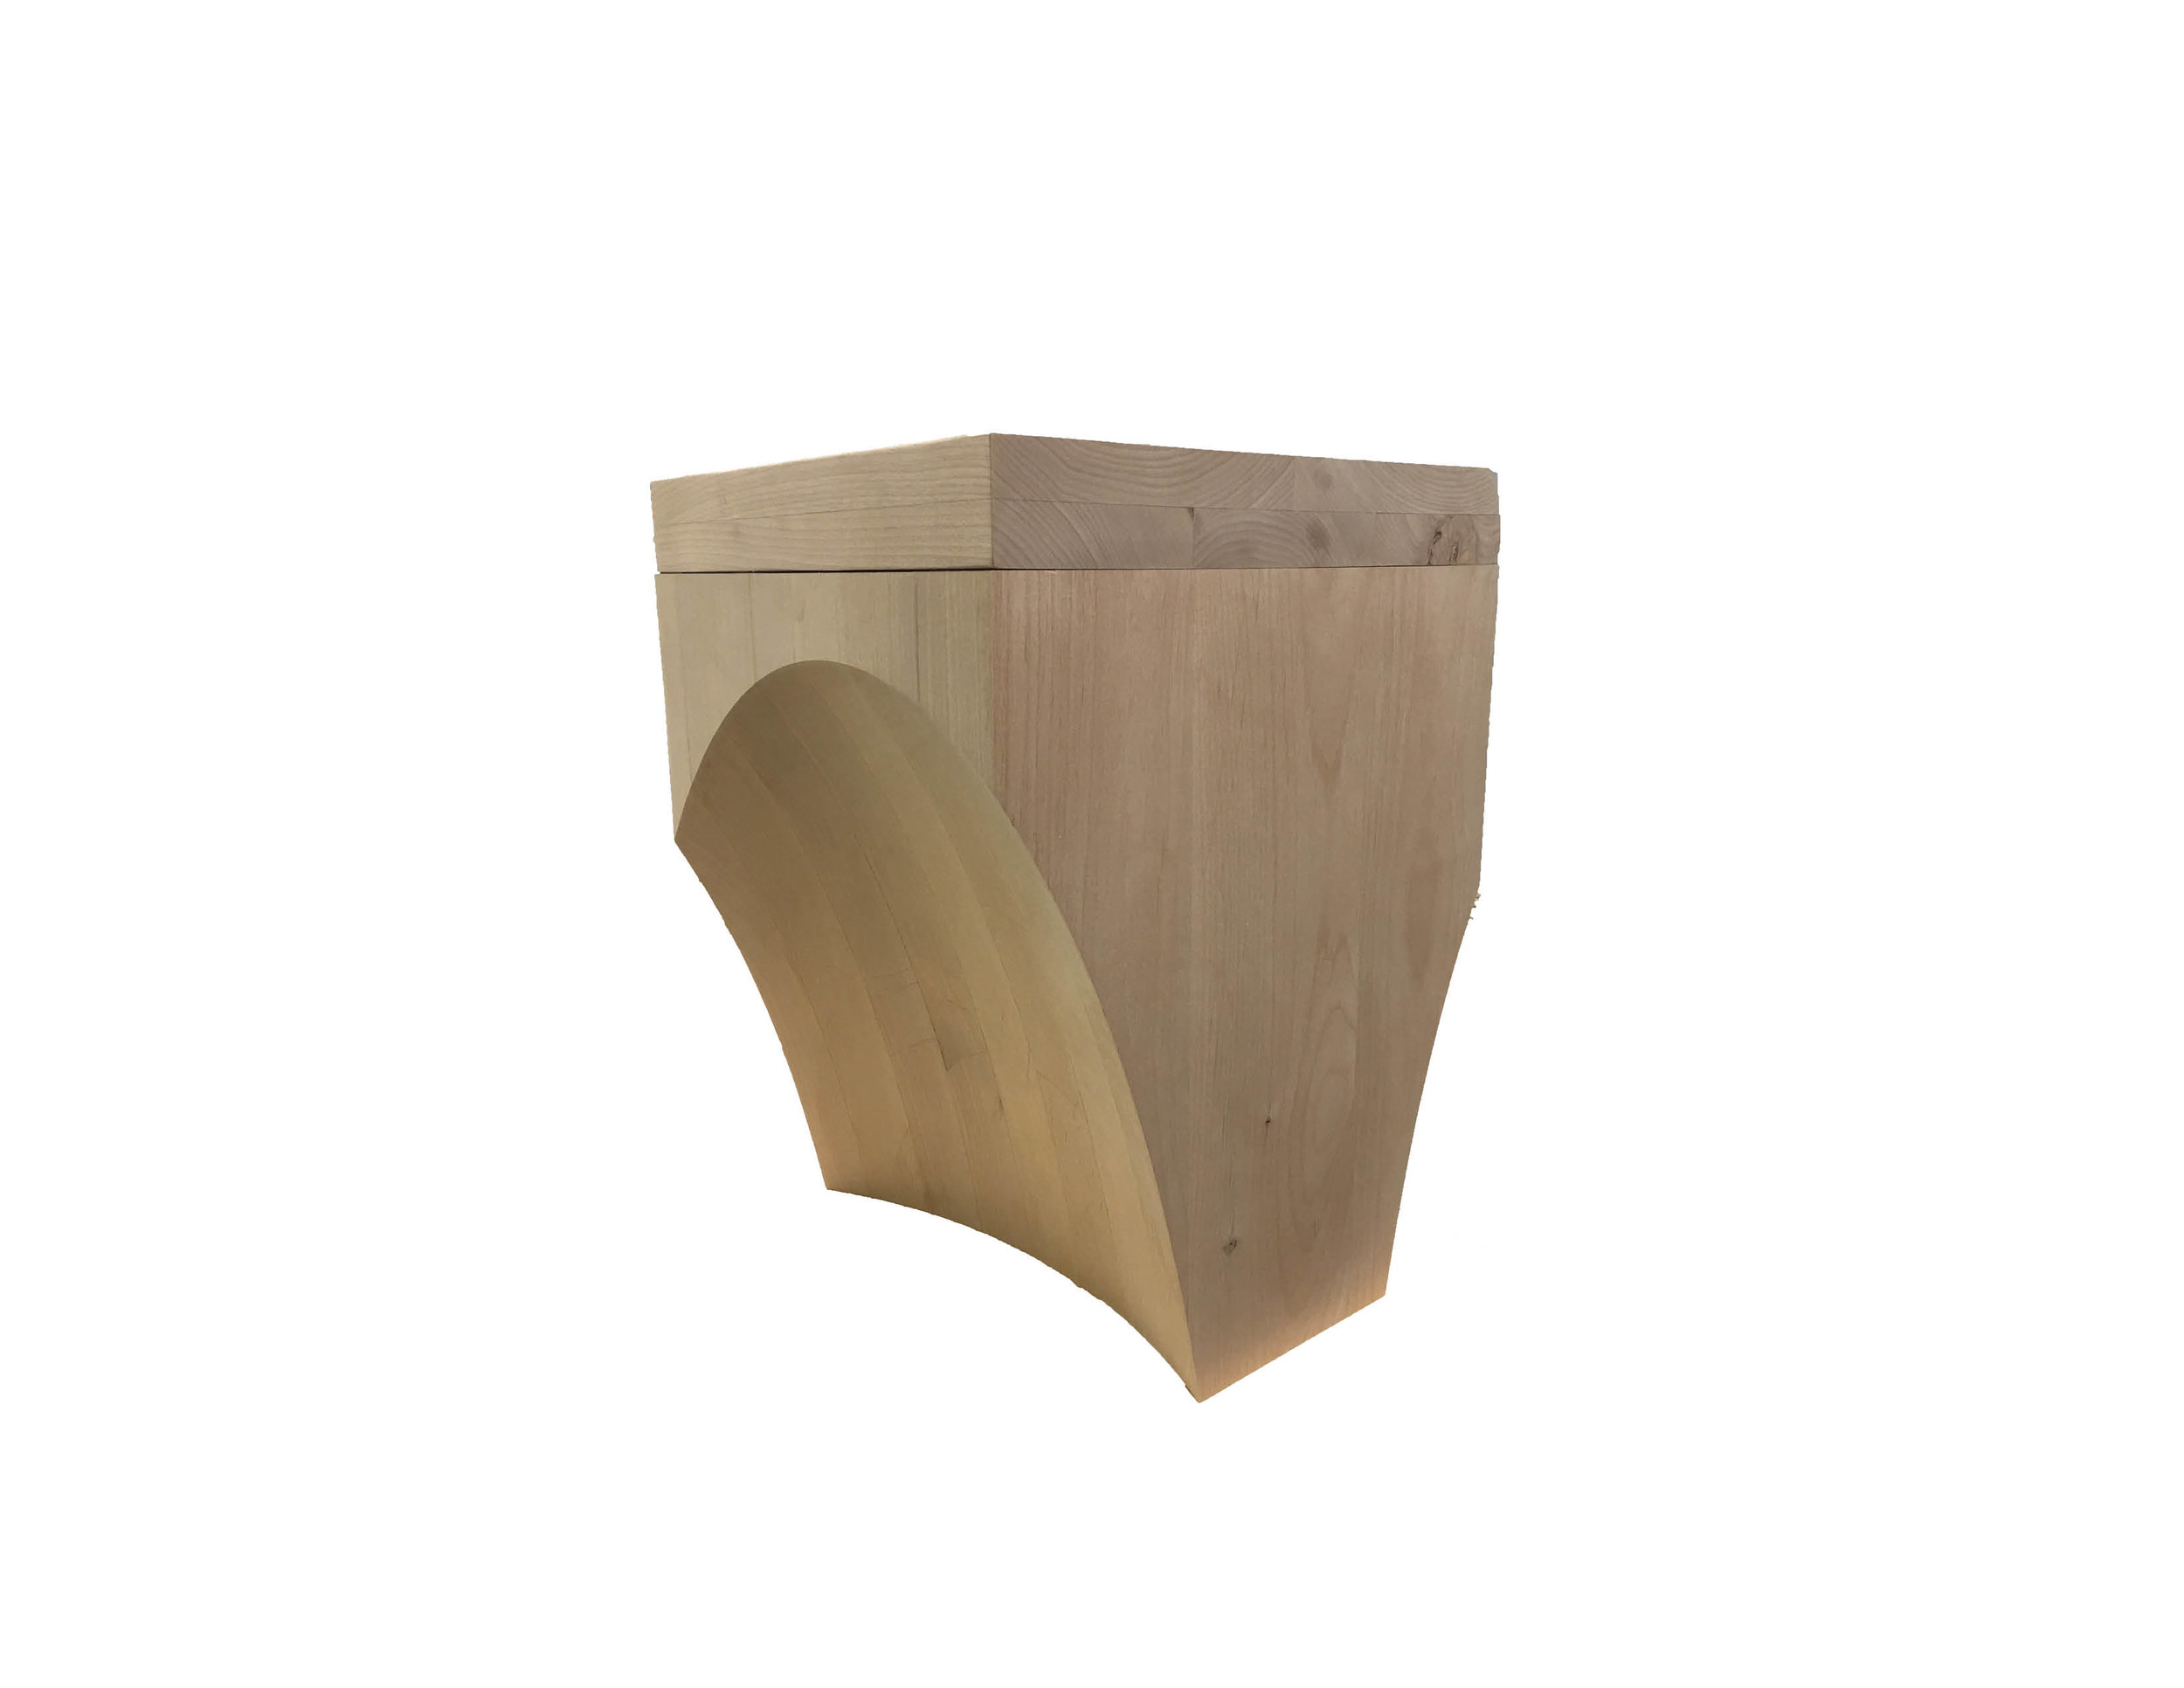 Full-Sized Final Prototype of Stool Concept 1